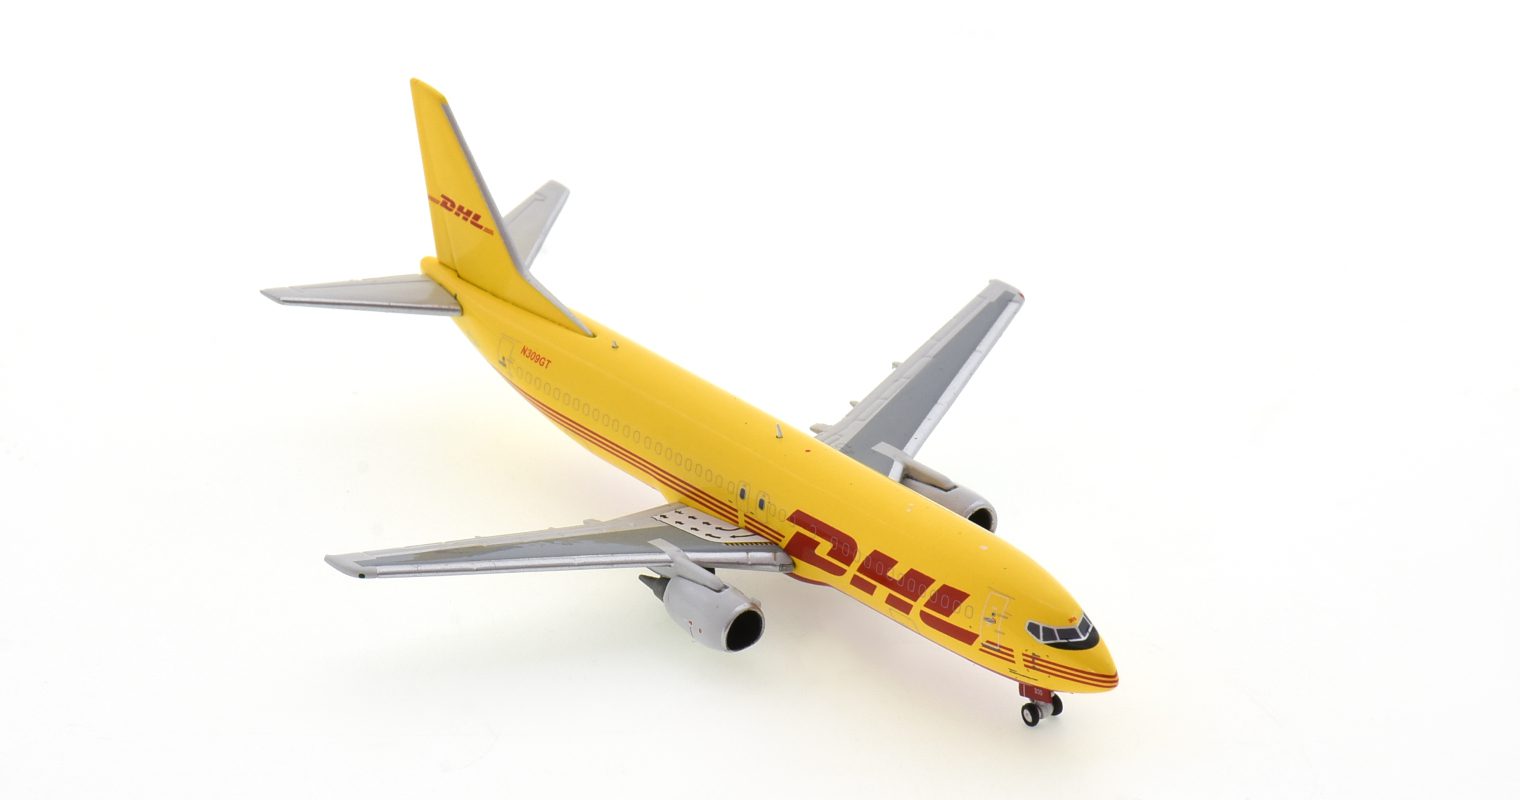 Front starboard side view of Panda Models PM202031 - 1/400 scale diecast model of the Boeing 737-400 SF registration N309GT in DHL Aviation's livery, circa 2020.